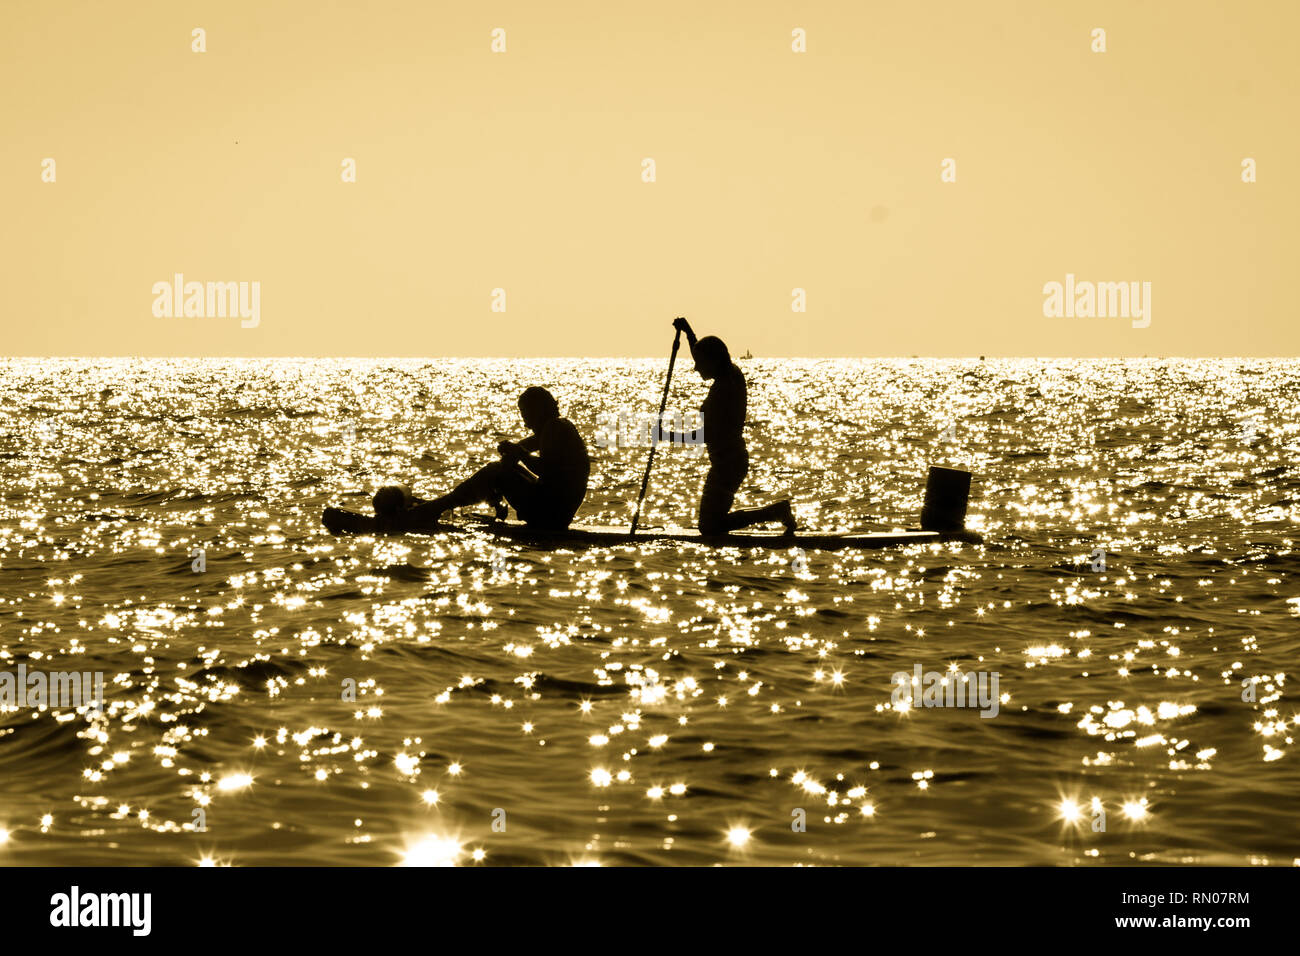 Two Silhouettes Of Men In A Fishing Boat At Sunset Stock Photo